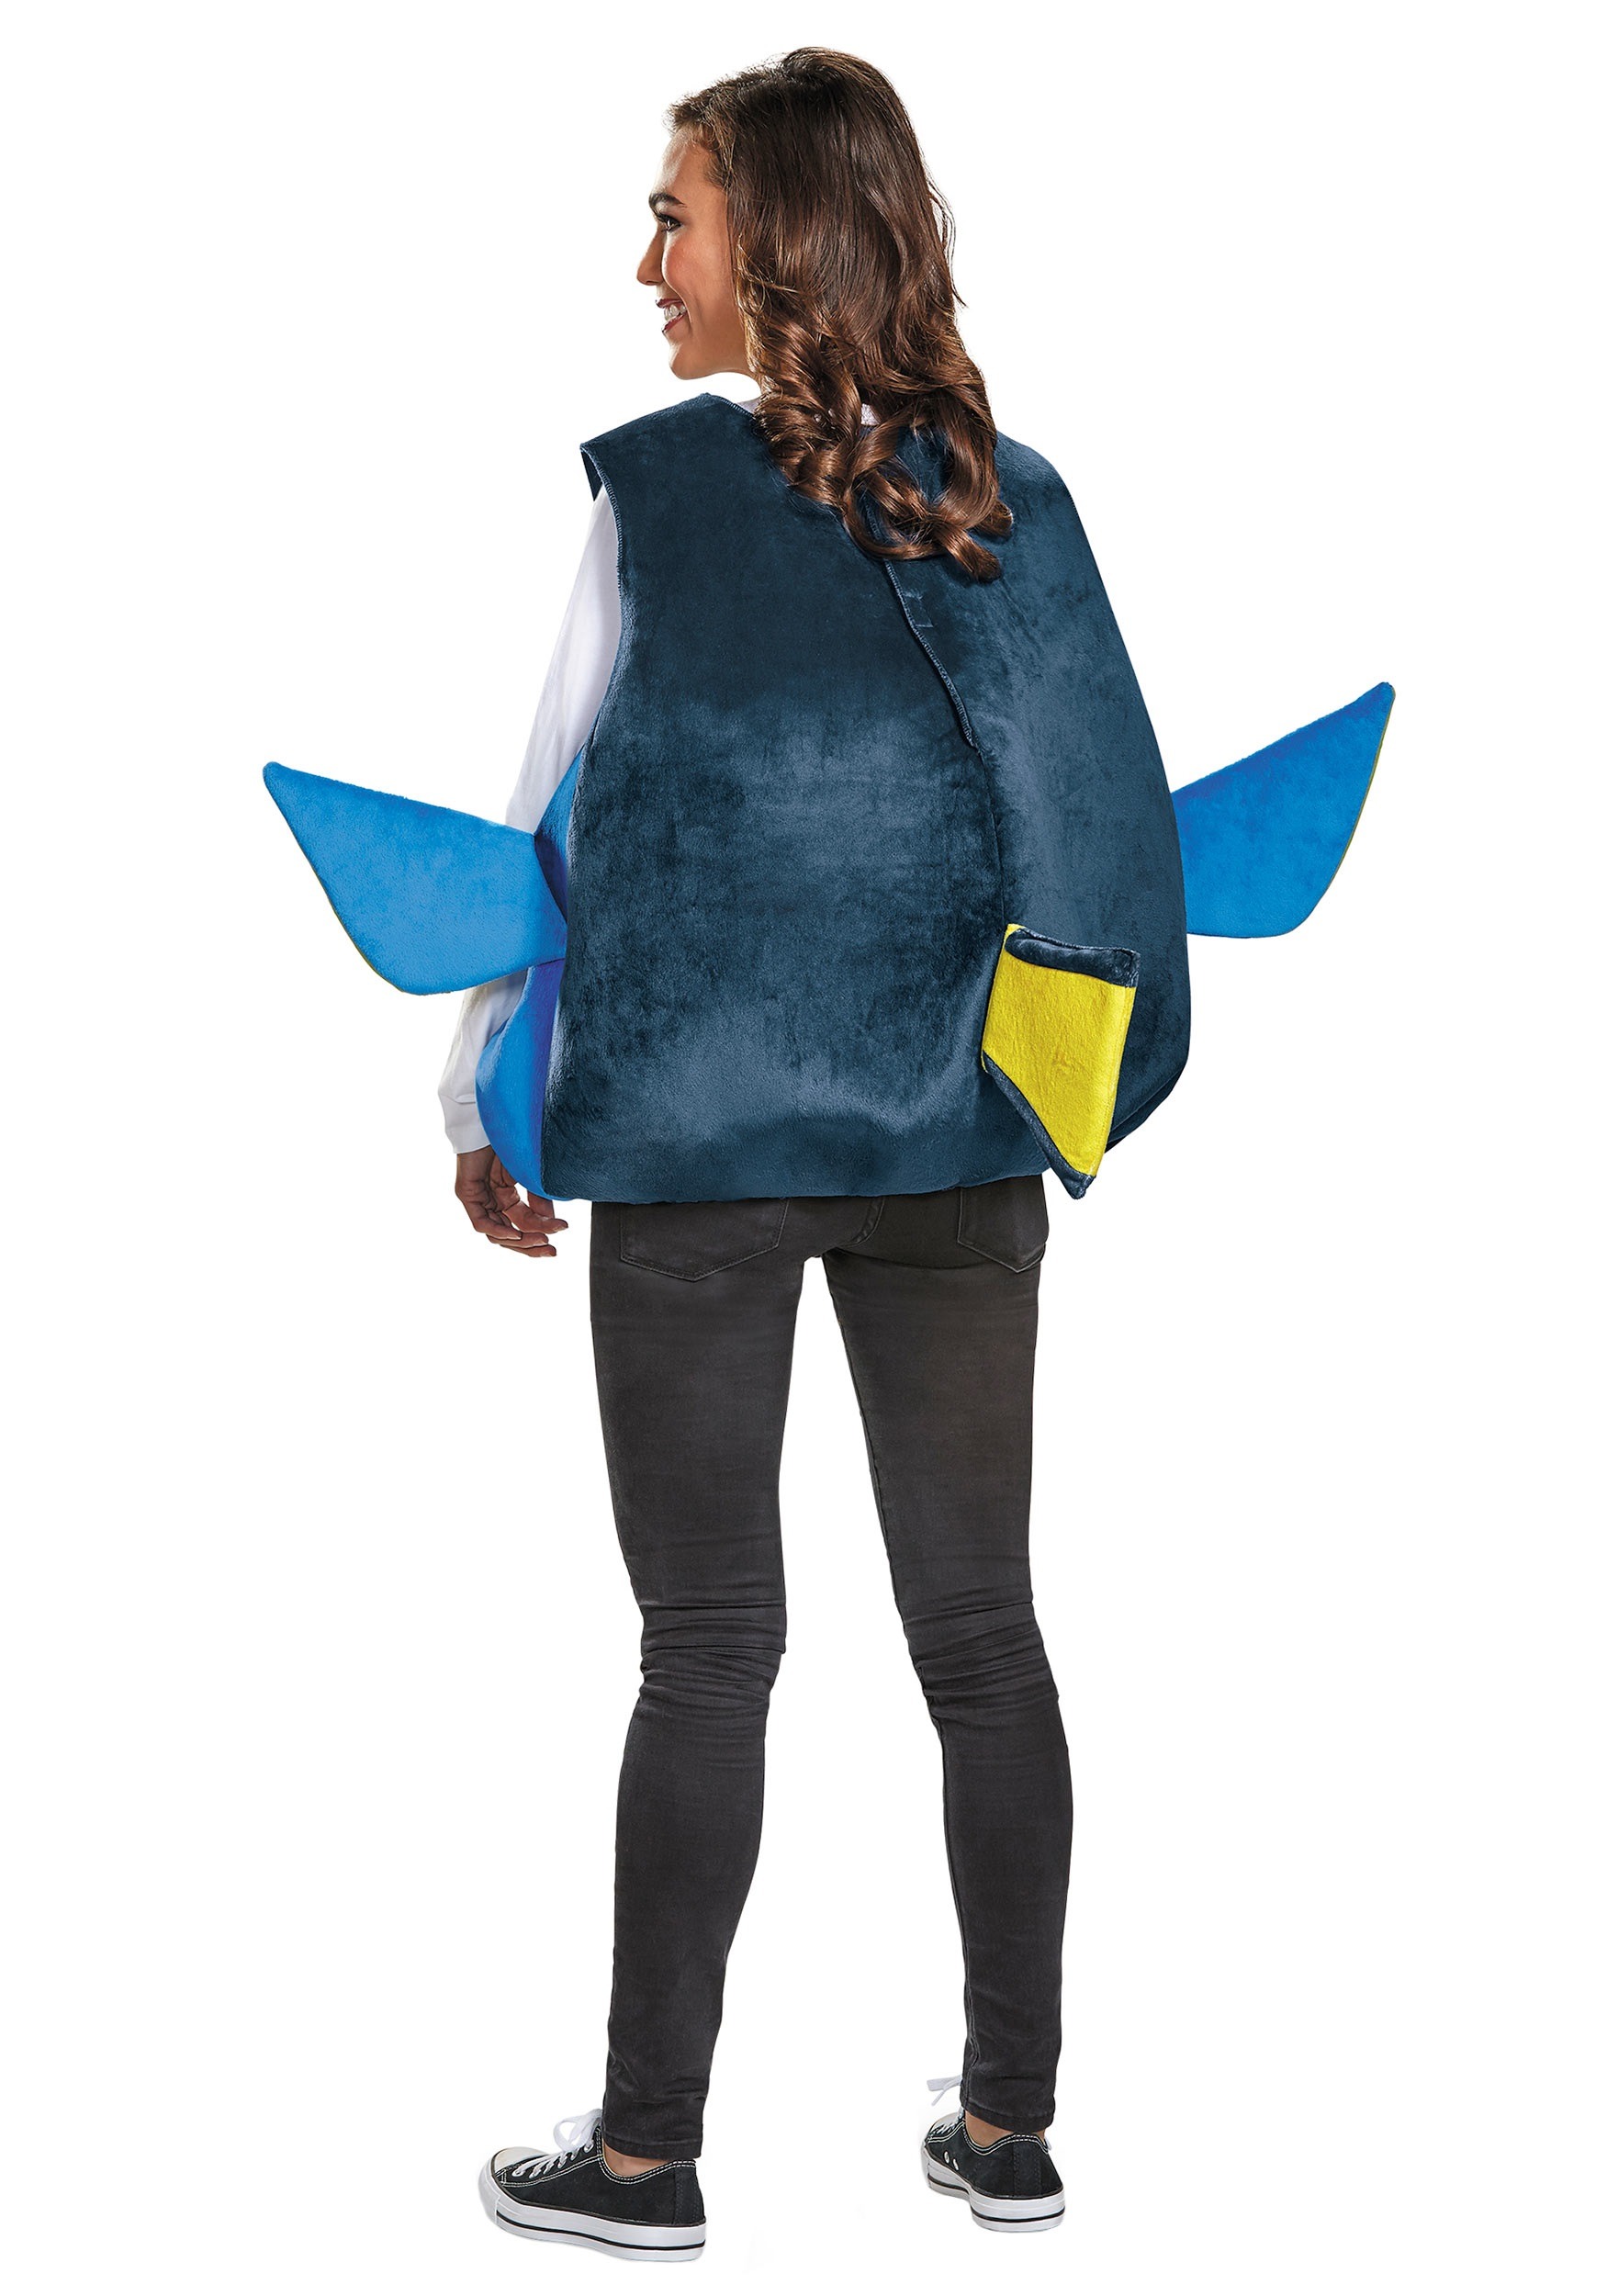 Disguise Dory Adult Fish Costume